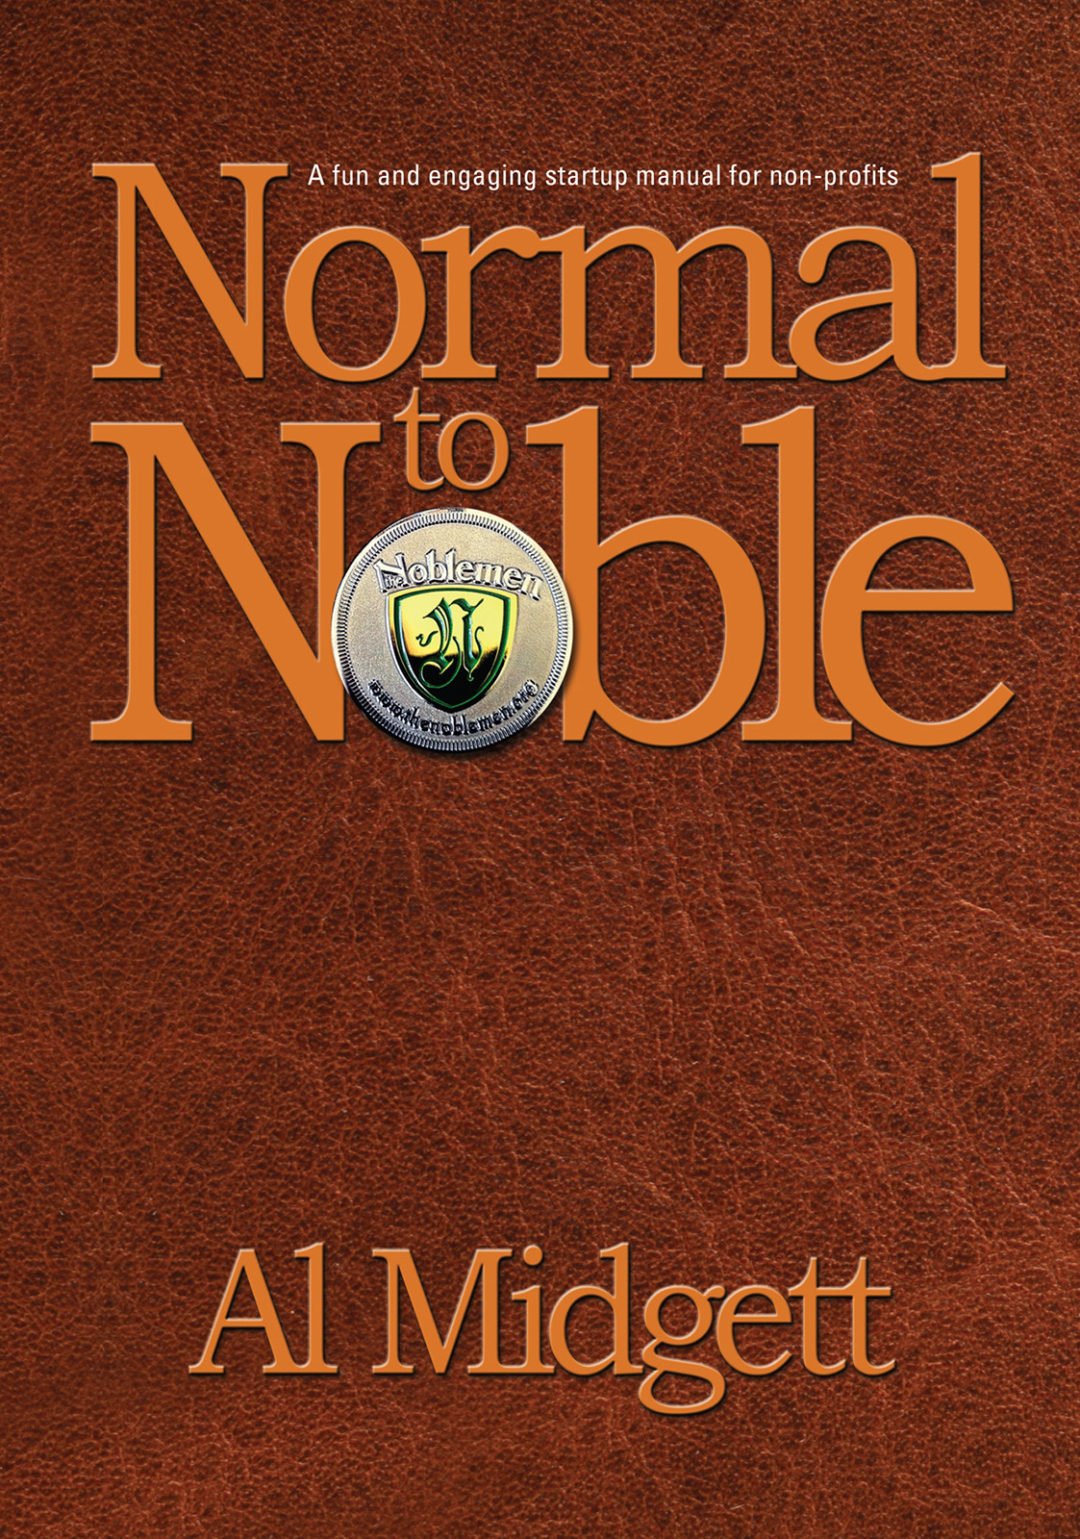 Normal to Noble